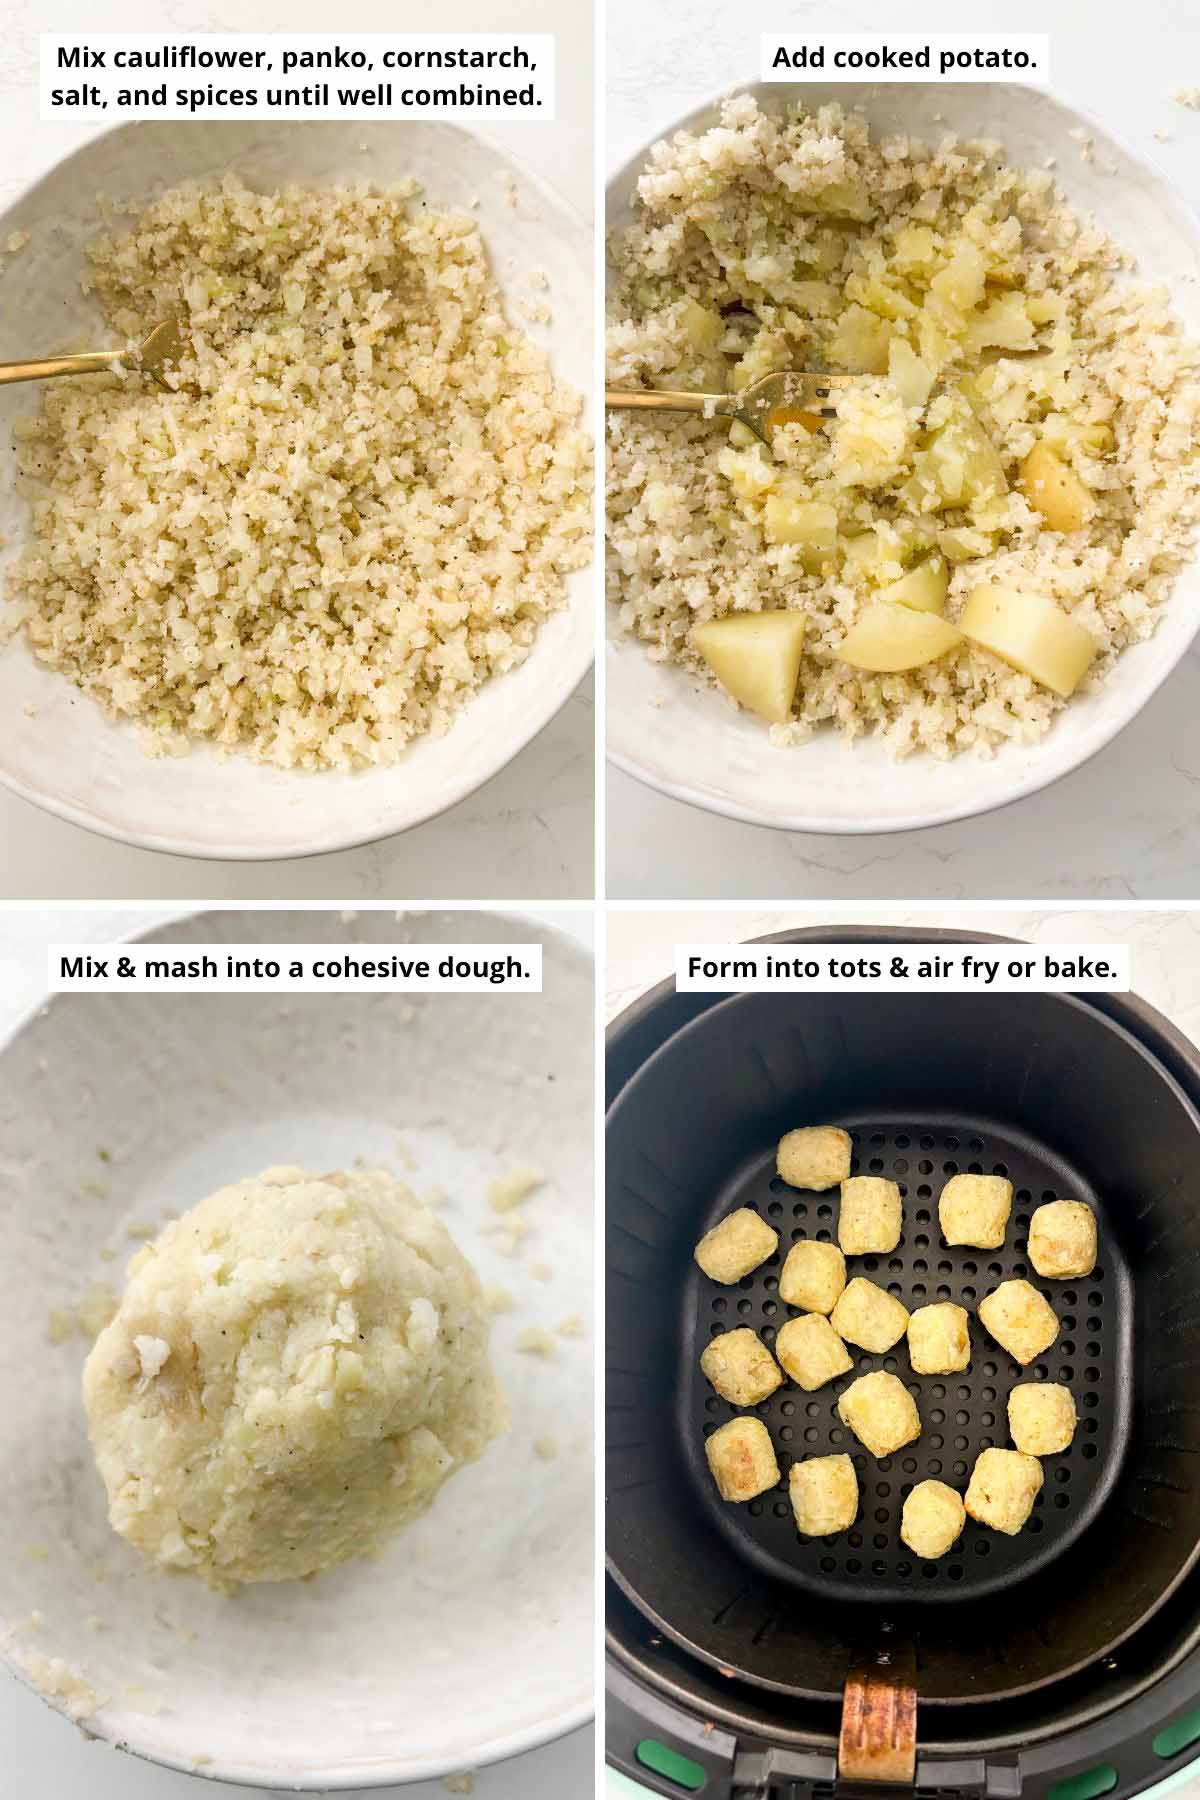 image collage of cauliflower mixture, adding potatoes, the finished dough, and cauliflower tots in the air fryer basket before cooking